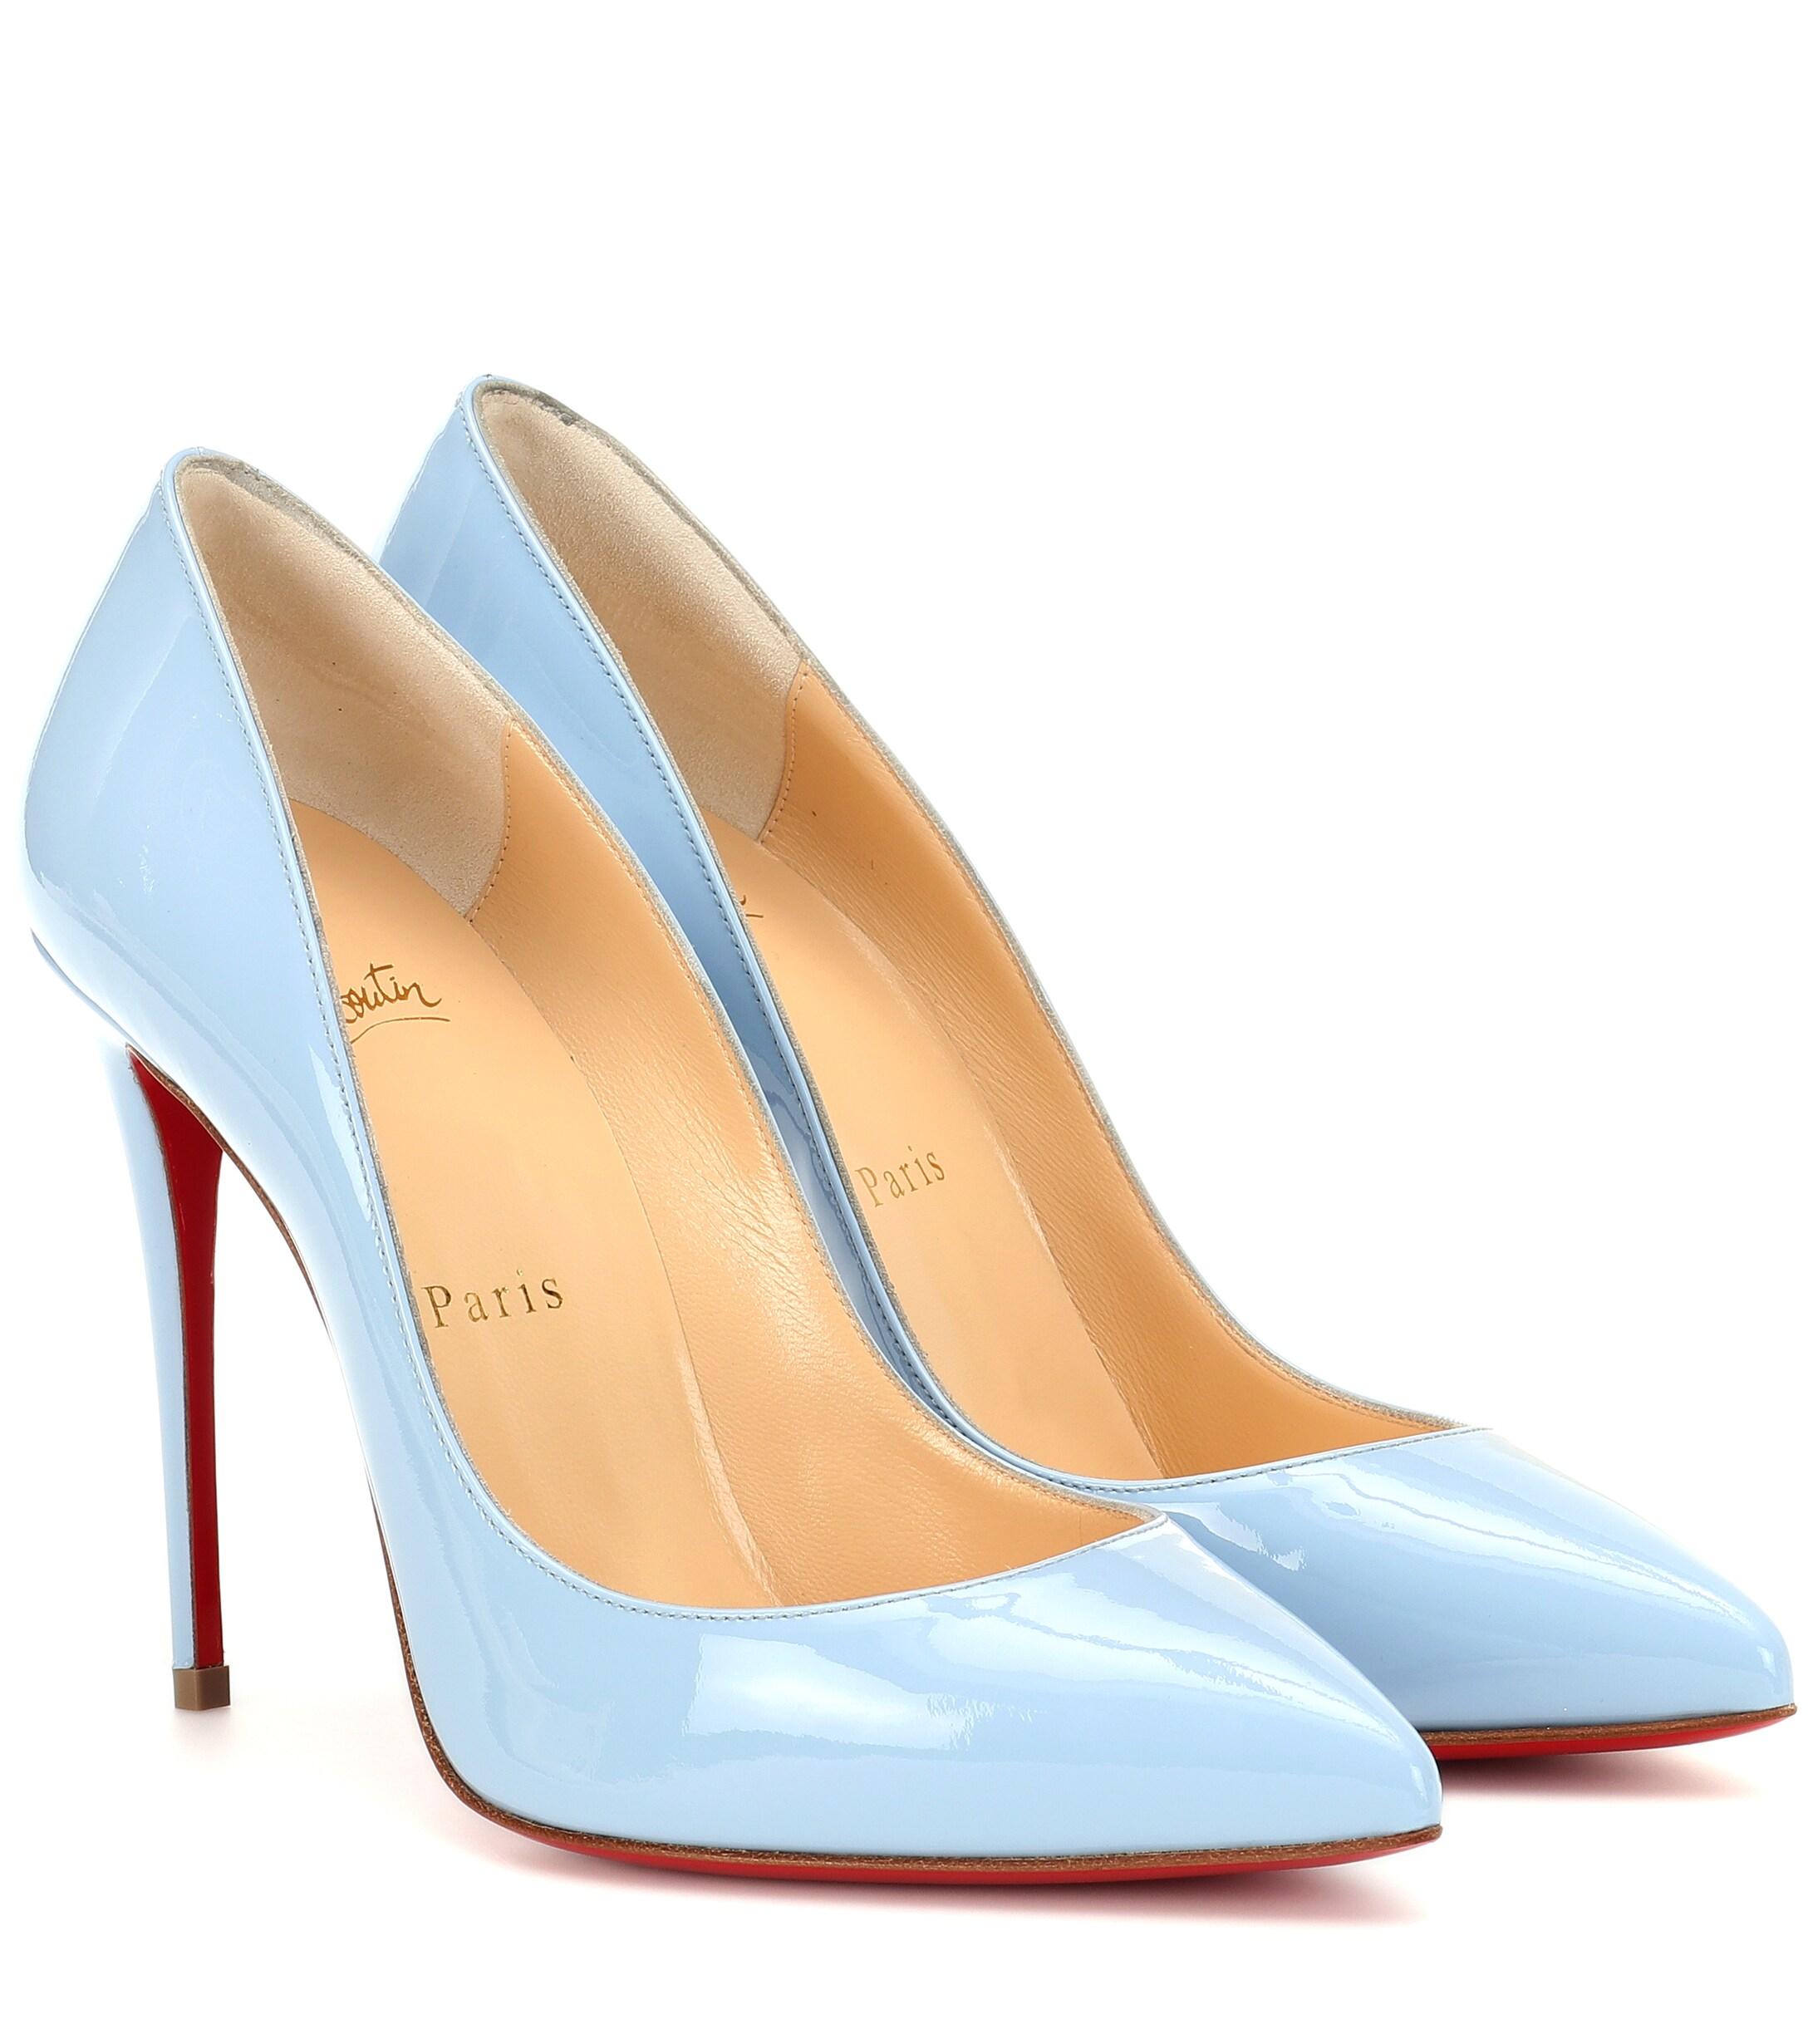 Louboutin Follies Patent Leather Pumps in Blue | Lyst